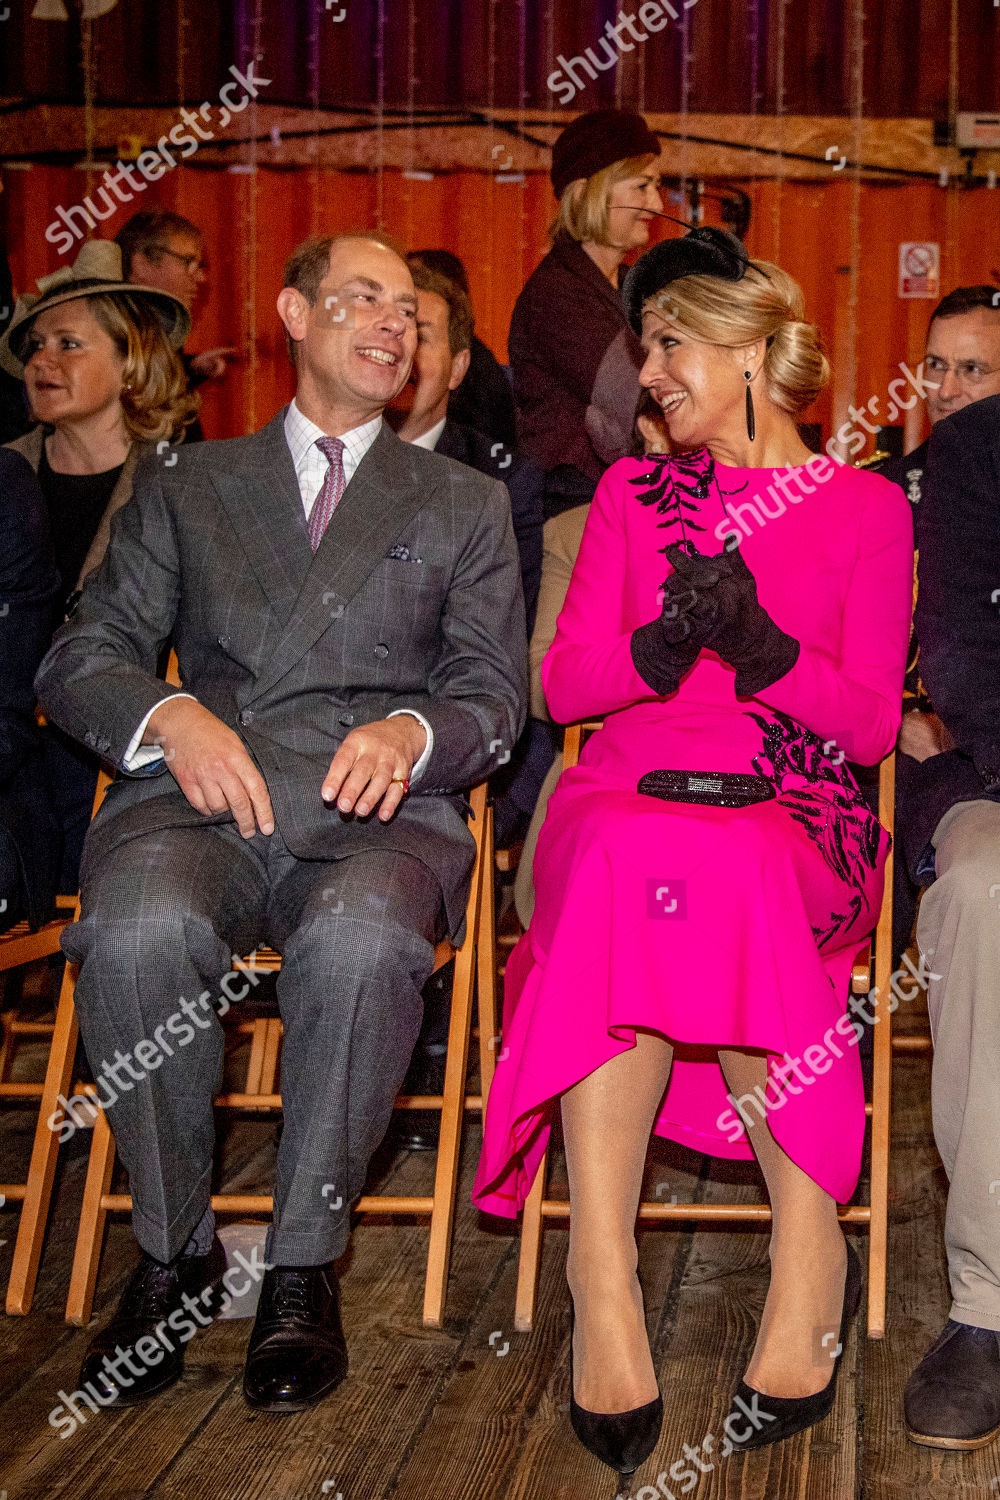 state-visit-of-the-king-and-queen-of-the-netherlands-london-uk-shutterstock-editorial-9943238x.jpg